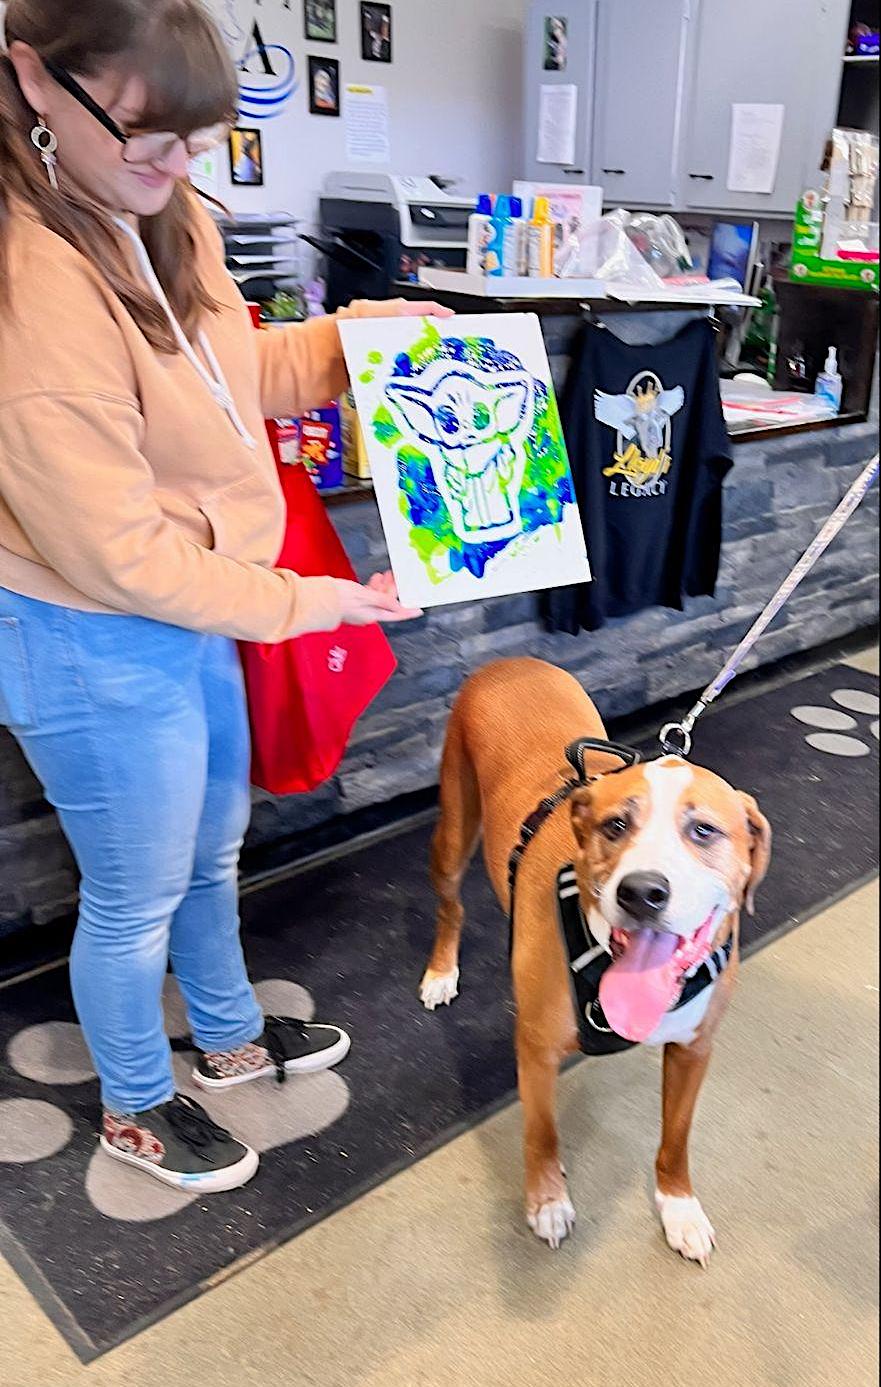 Goliath has shelter supporter Emilee showing off his Yoda portrait. (Submitted)